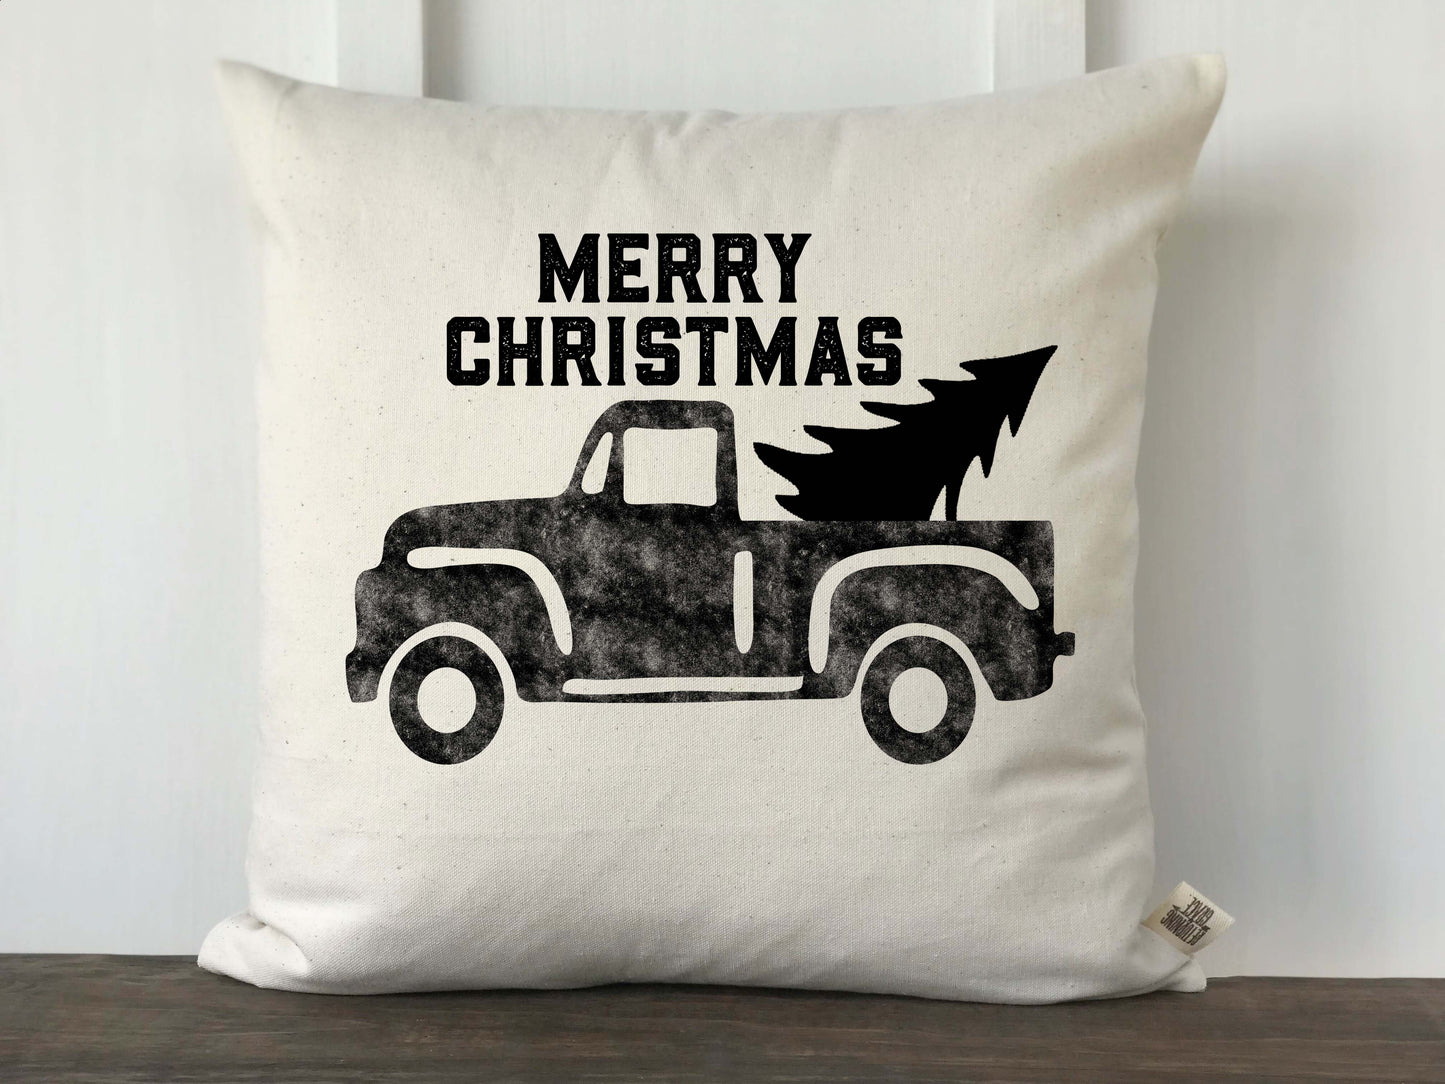 Merry Christmas Vintage Truck Pillow Cover - Returning Grace Designs